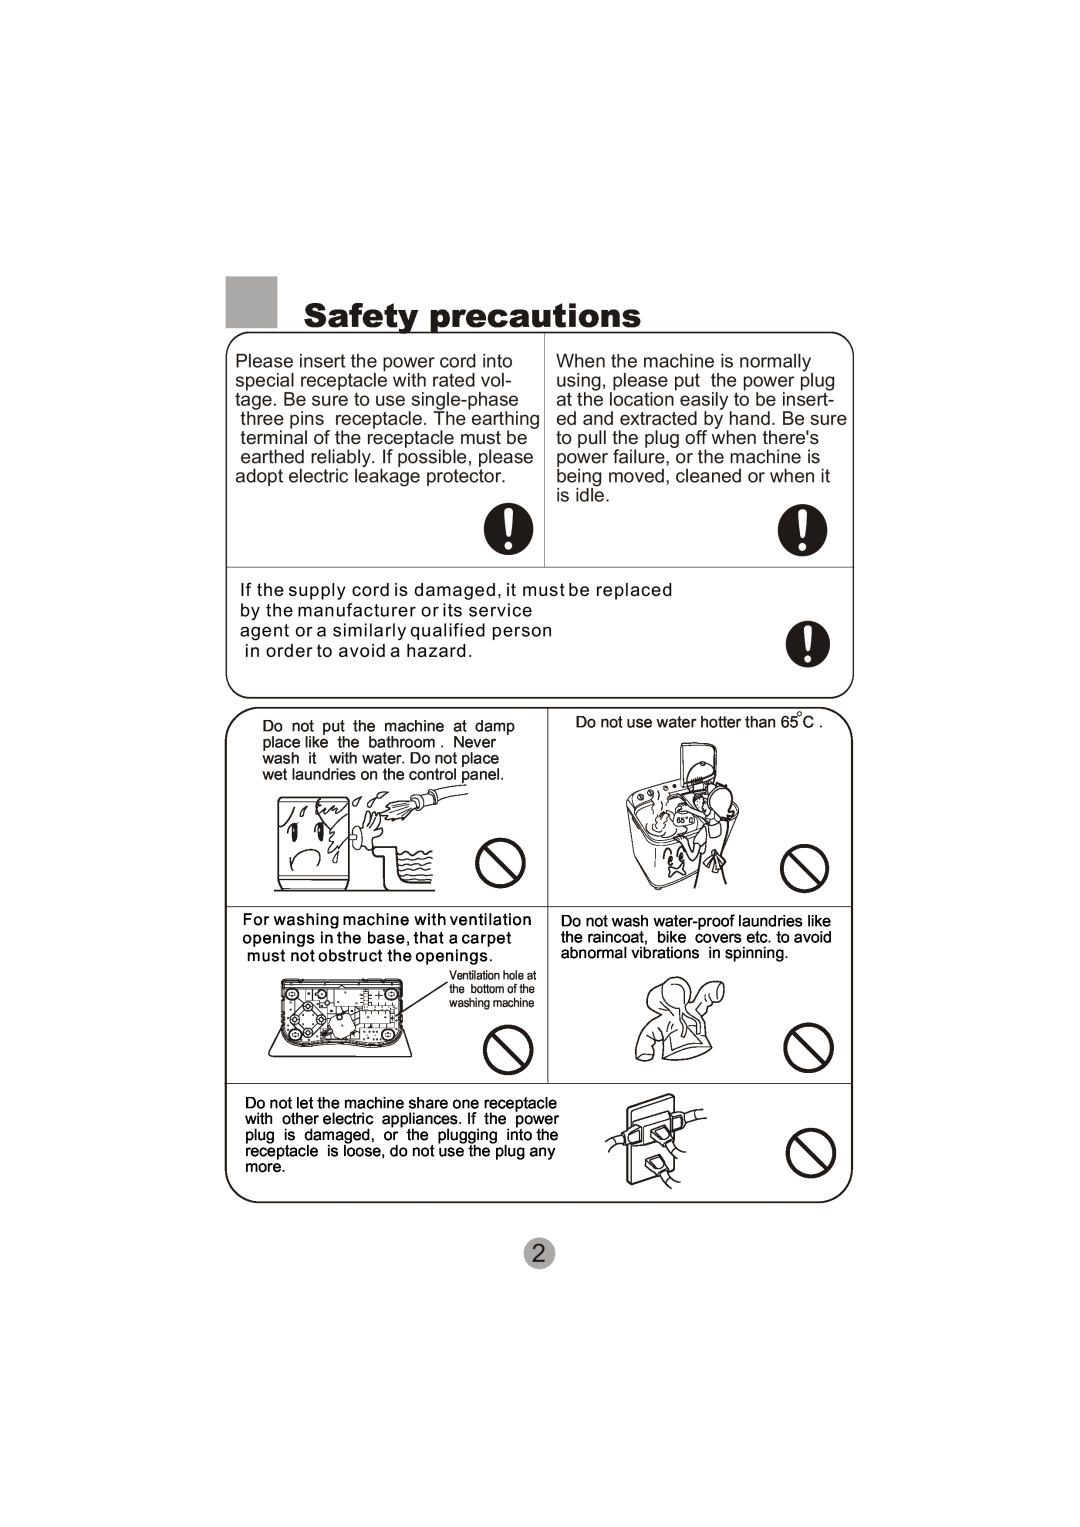 Haier XPB60-113S user manual Safety precautions, agent or a similarly qualified person in order to avoid a hazard 